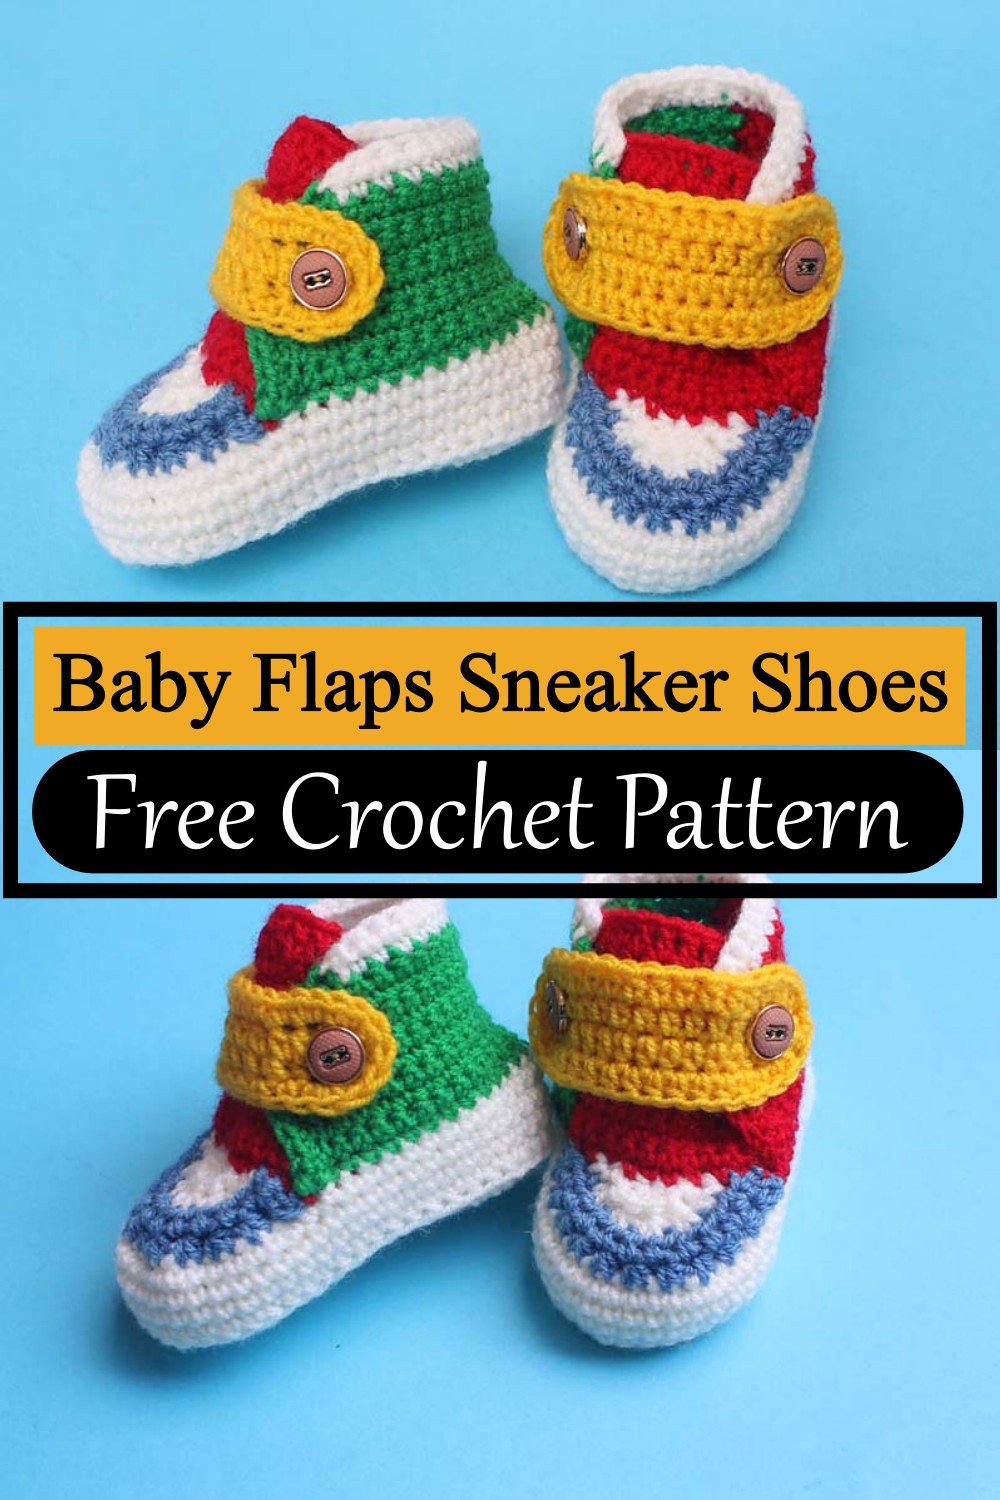 Baby Flaps Sneaker Shoes